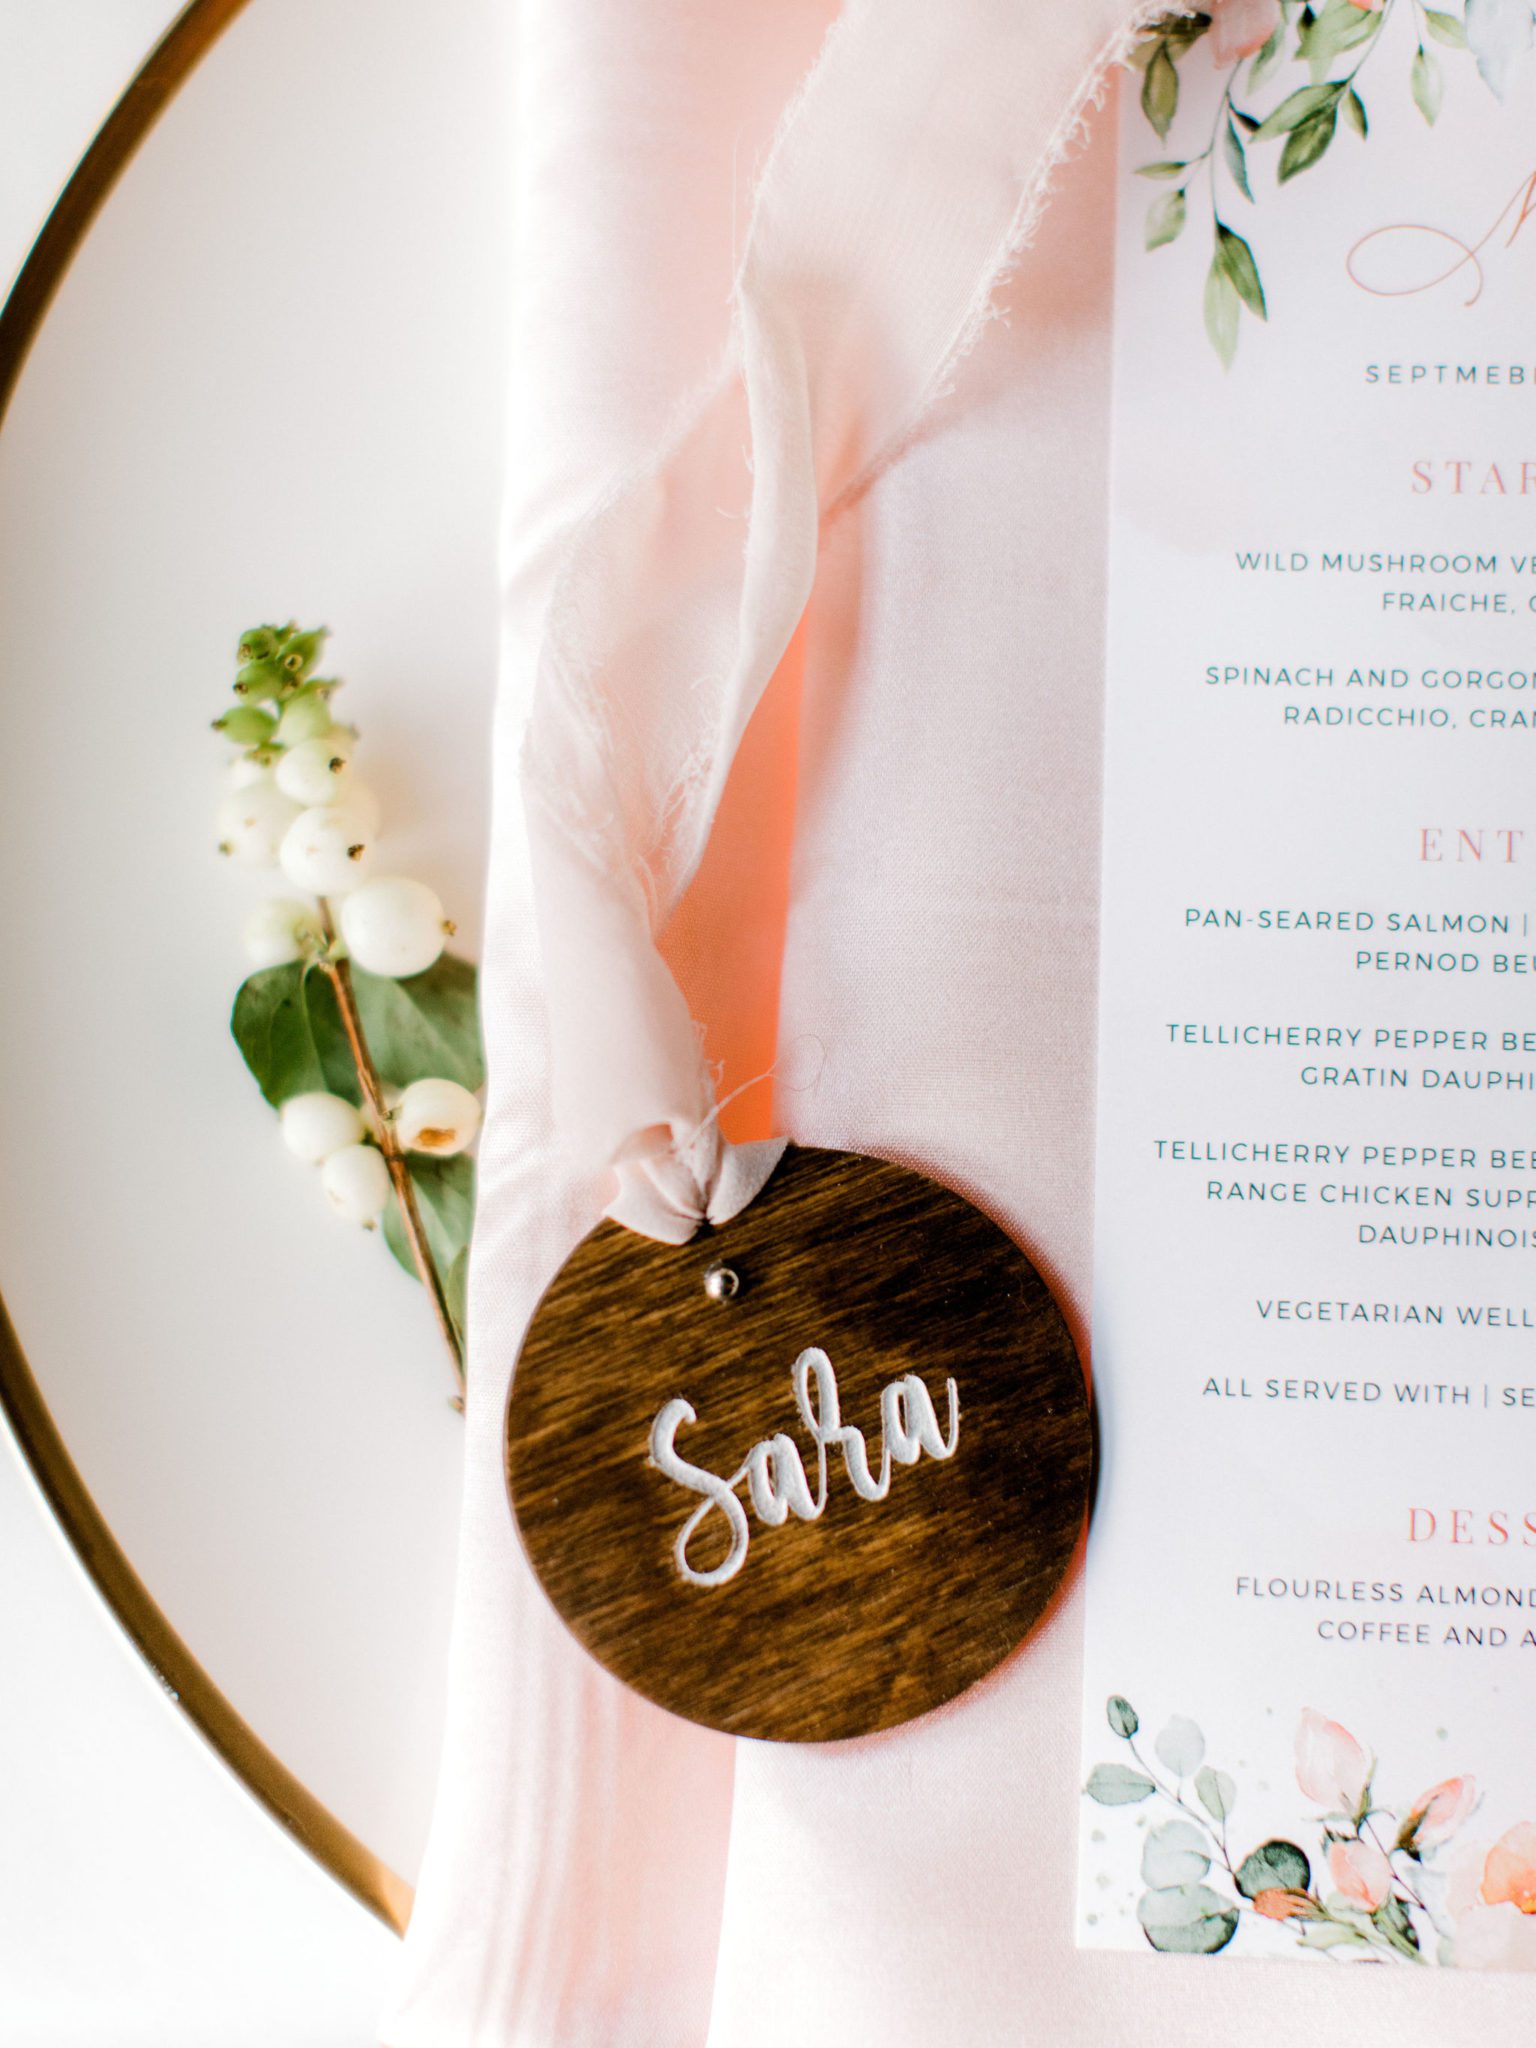 Wooden table place card inspiration for wedding day details